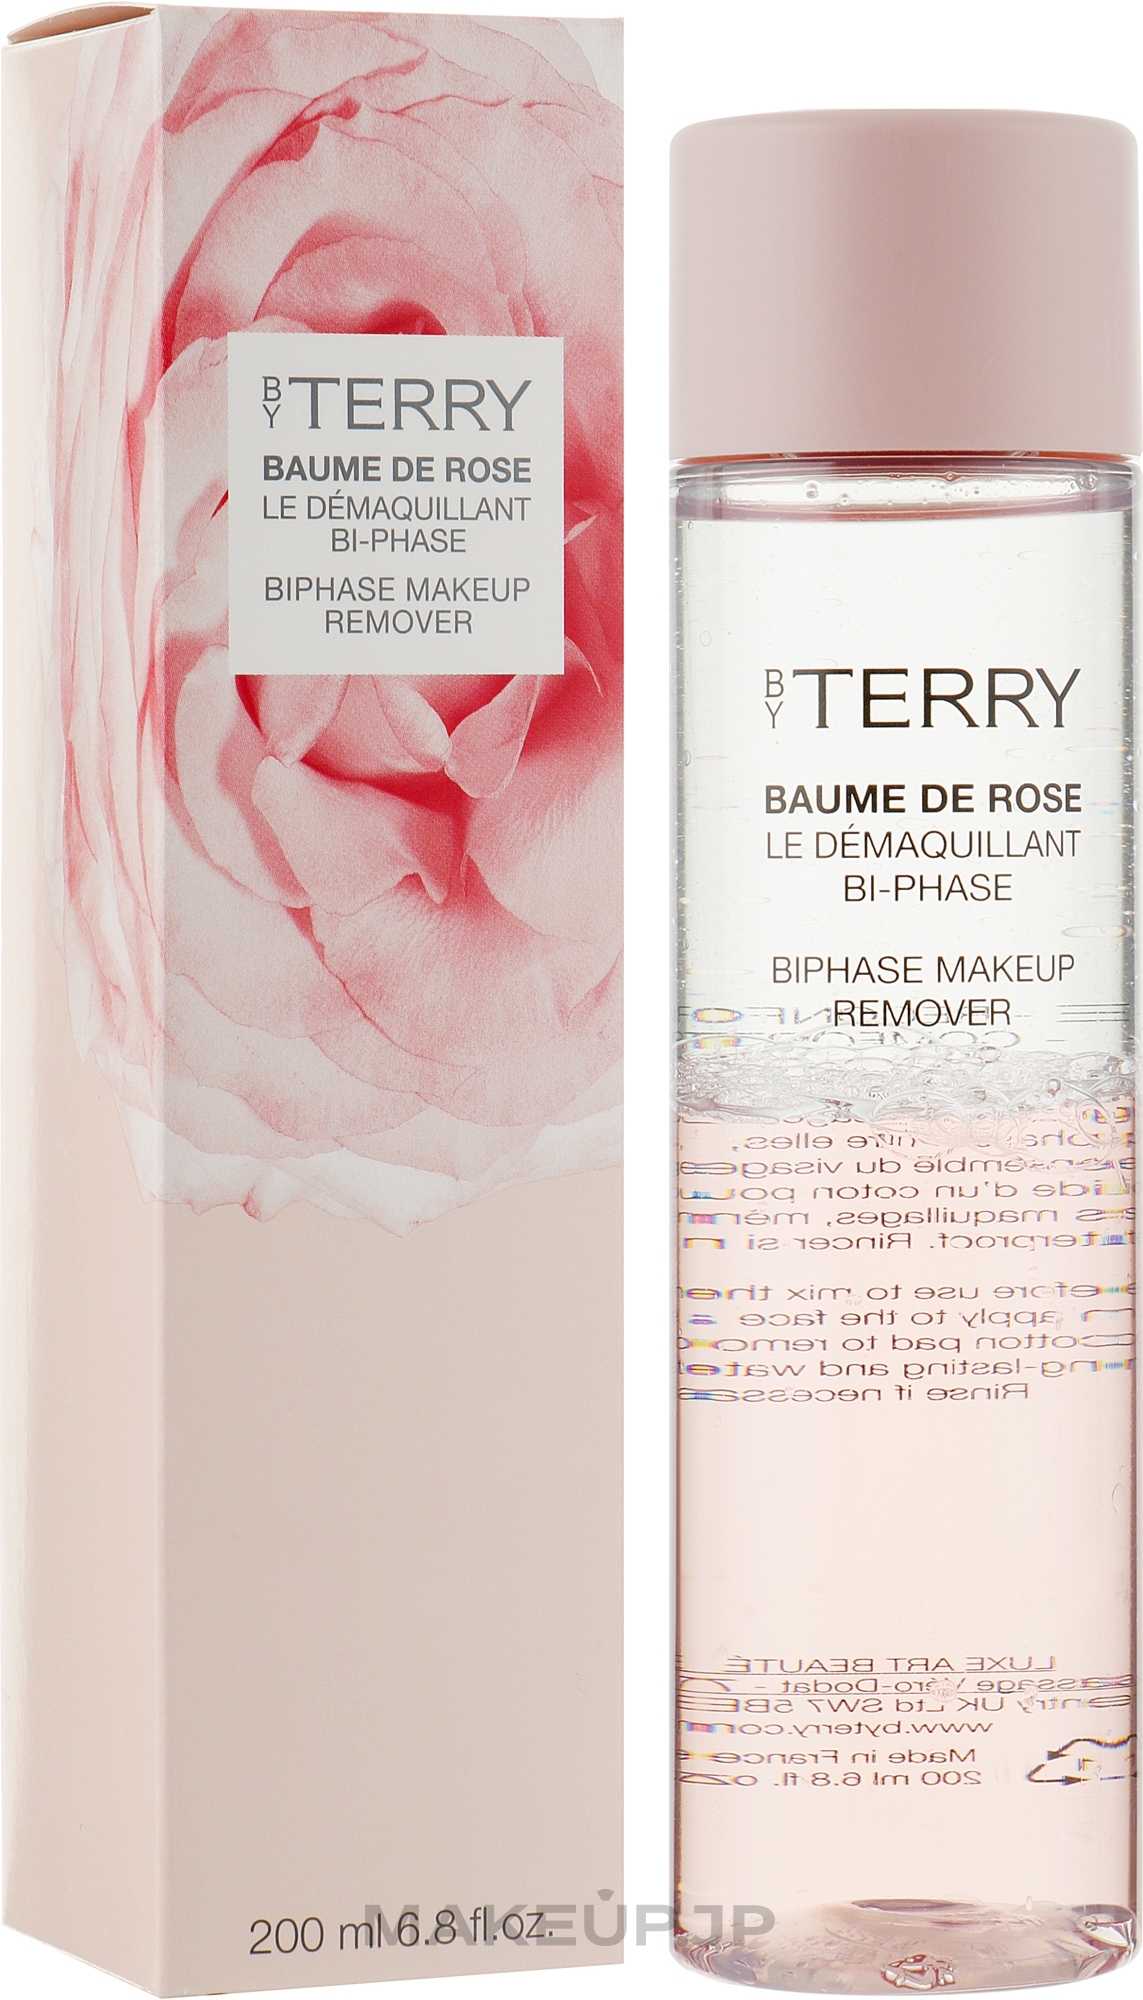 Biphase Makeup Remover - By Terry Baume De Rose Bi-Phase Make-Up Remover — photo 200 ml